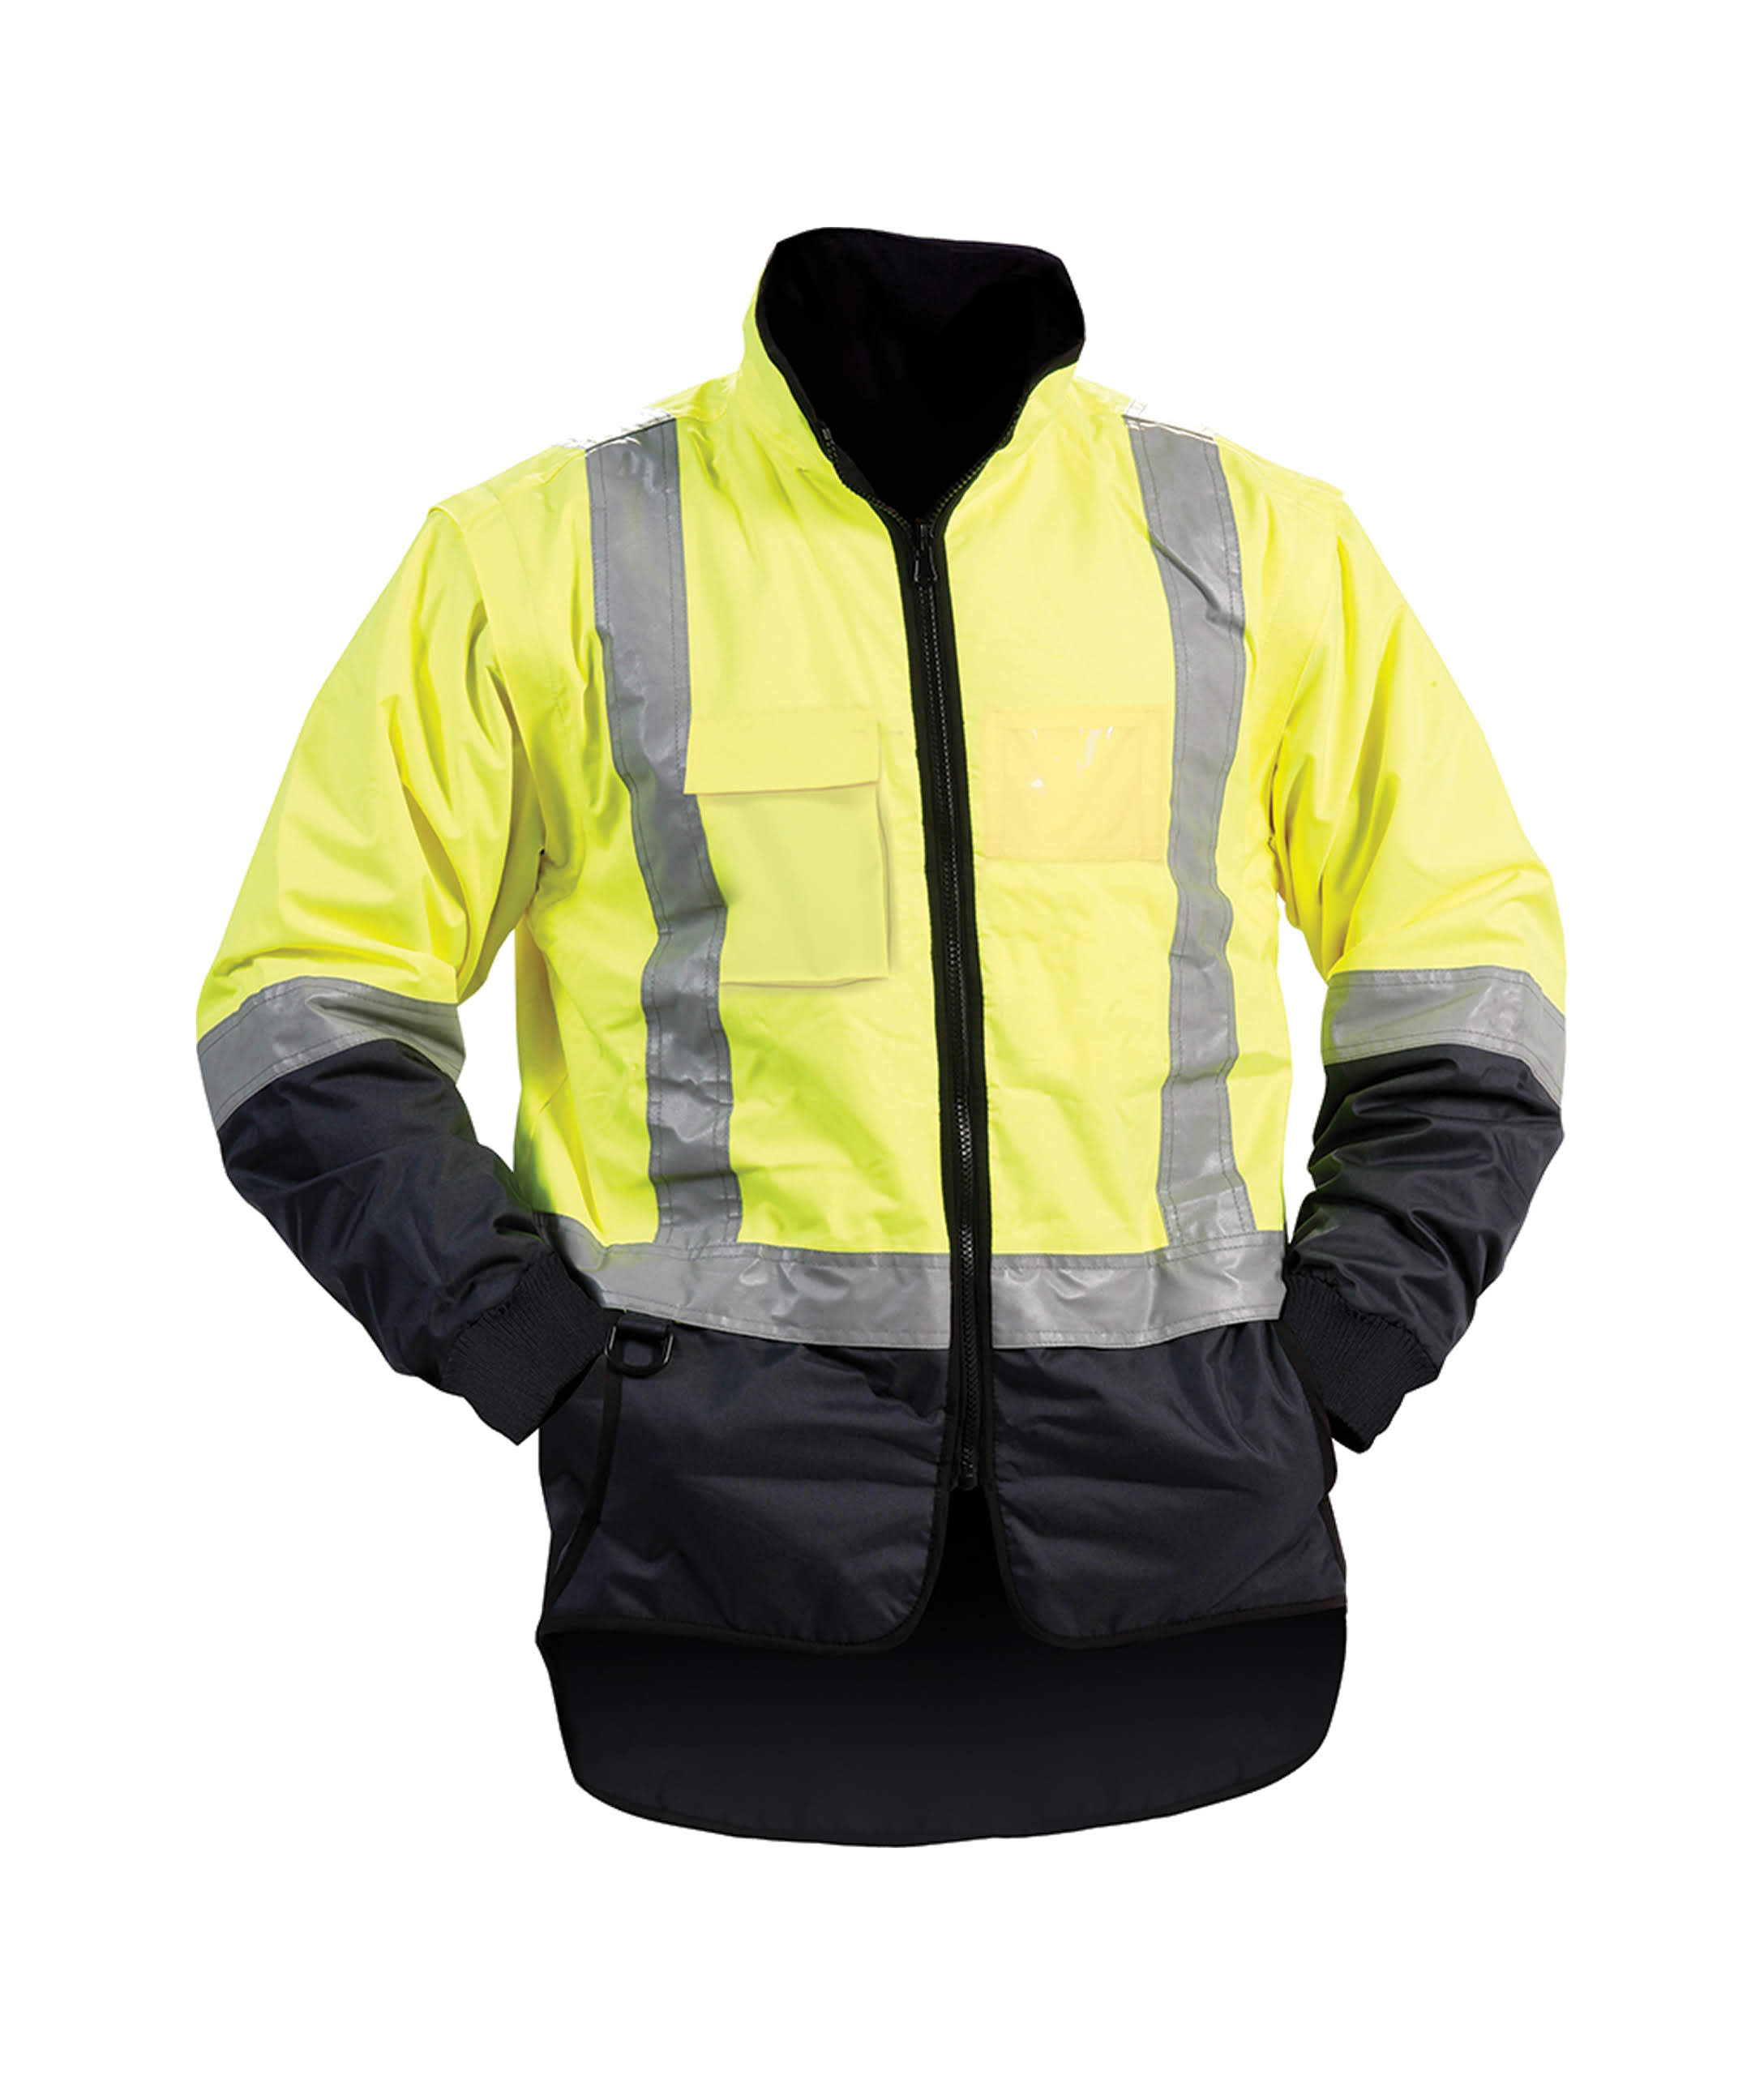 Stamina Day/Night 5-in-1 Jacket/Vest Combo Yellow/Navy (JNP5N1SWR)